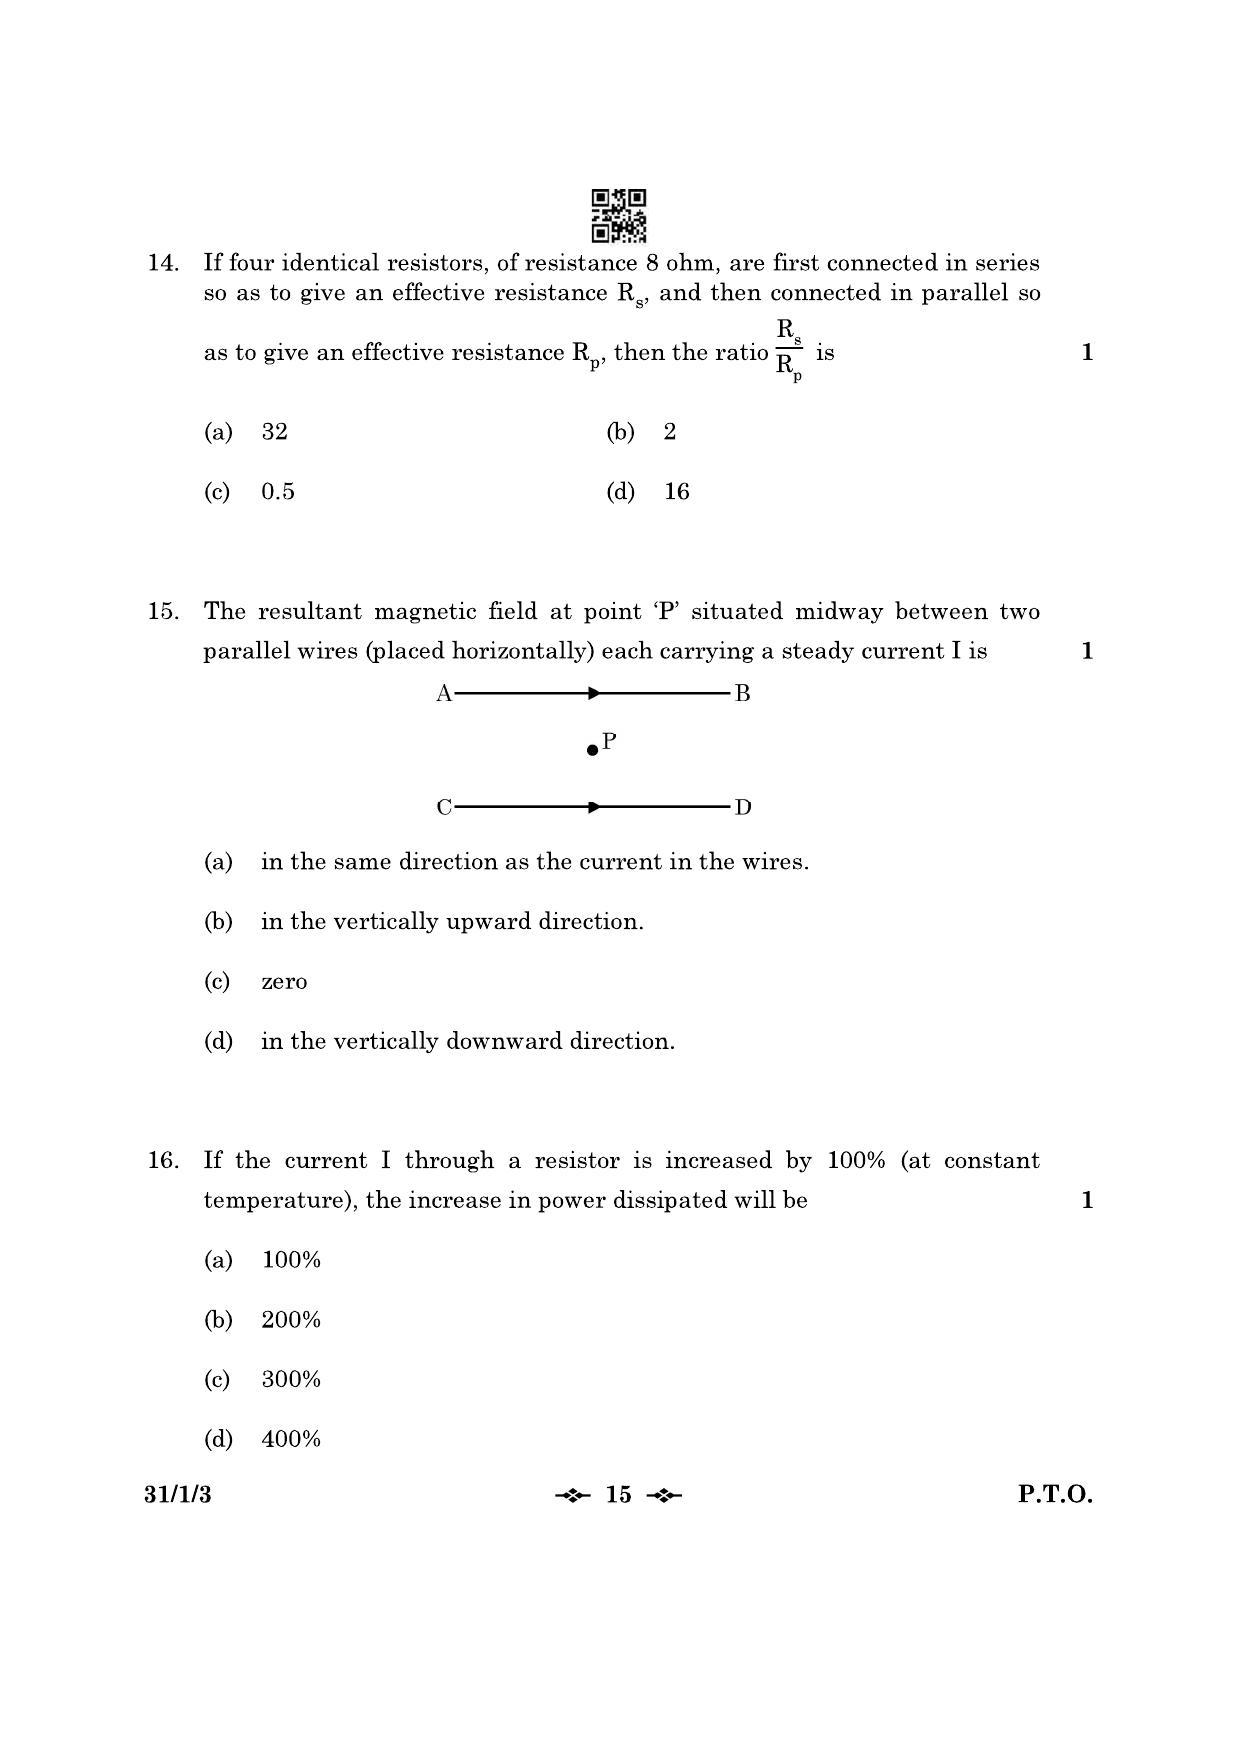 CBSE Class 10 31-1-3 Science 2023 Question Paper - Page 15